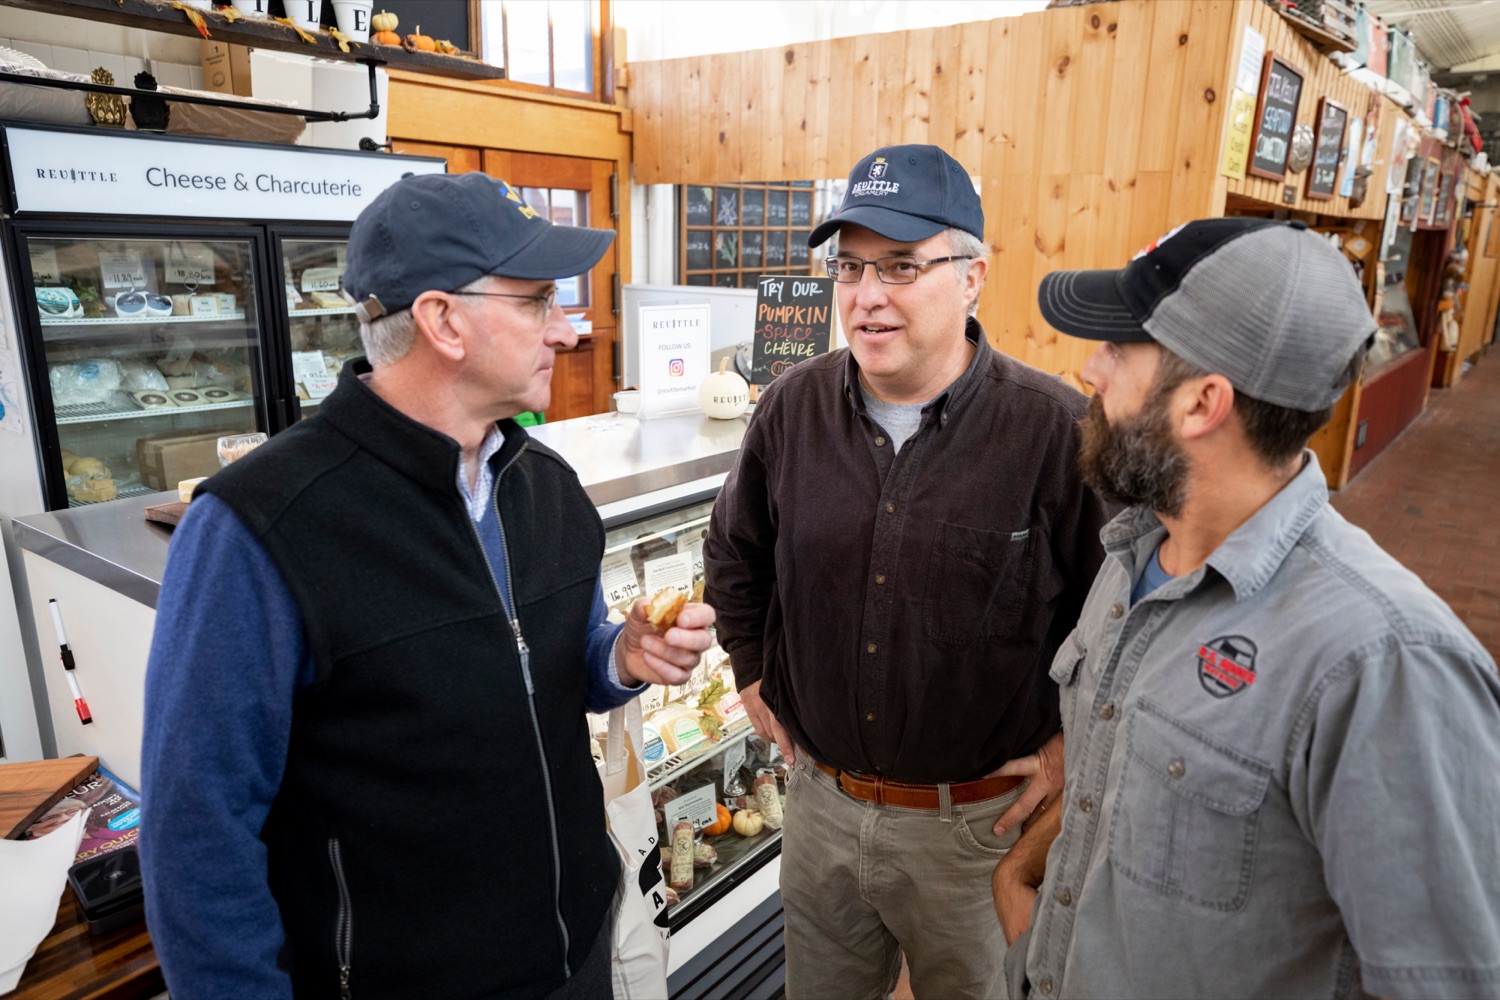 Pennsylvania Department of Agriculture Secretary Russell Redding talks with Mark Zimmerman, owner of Revittle Market, center, and Ryan Hummer, owner of R.G. Hummer Meat & Cheese, right, while grocery shopping for Thanksgiving dinner inside Broad Street Market on Thursday, November 21, 2019.<br><a href="https://filesource.amperwave.net/commonwealthofpa/photo/17546_AGRIC_Buy_Local_NK_024.JPG" target="_blank">⇣ Download Photo</a>